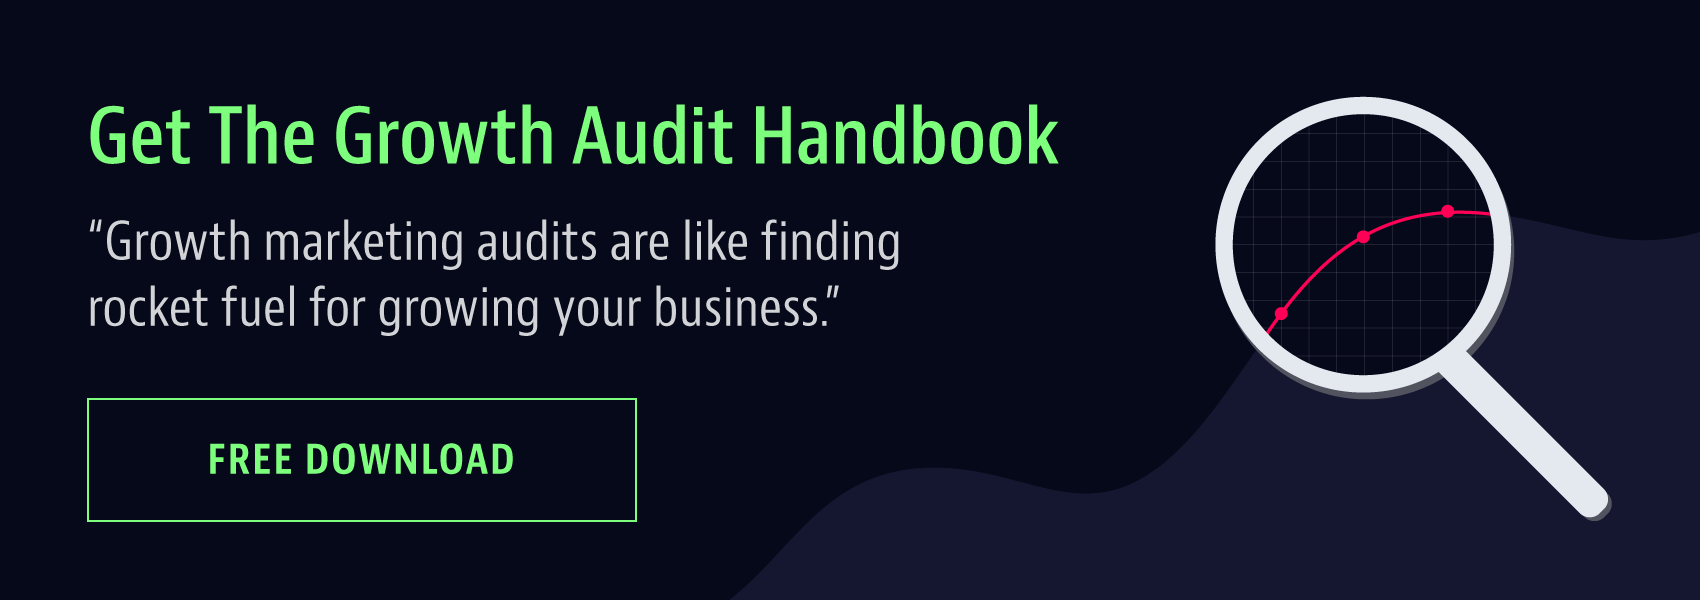 get the growth audit handbook free download - how to make a instagram bot to get followers quora